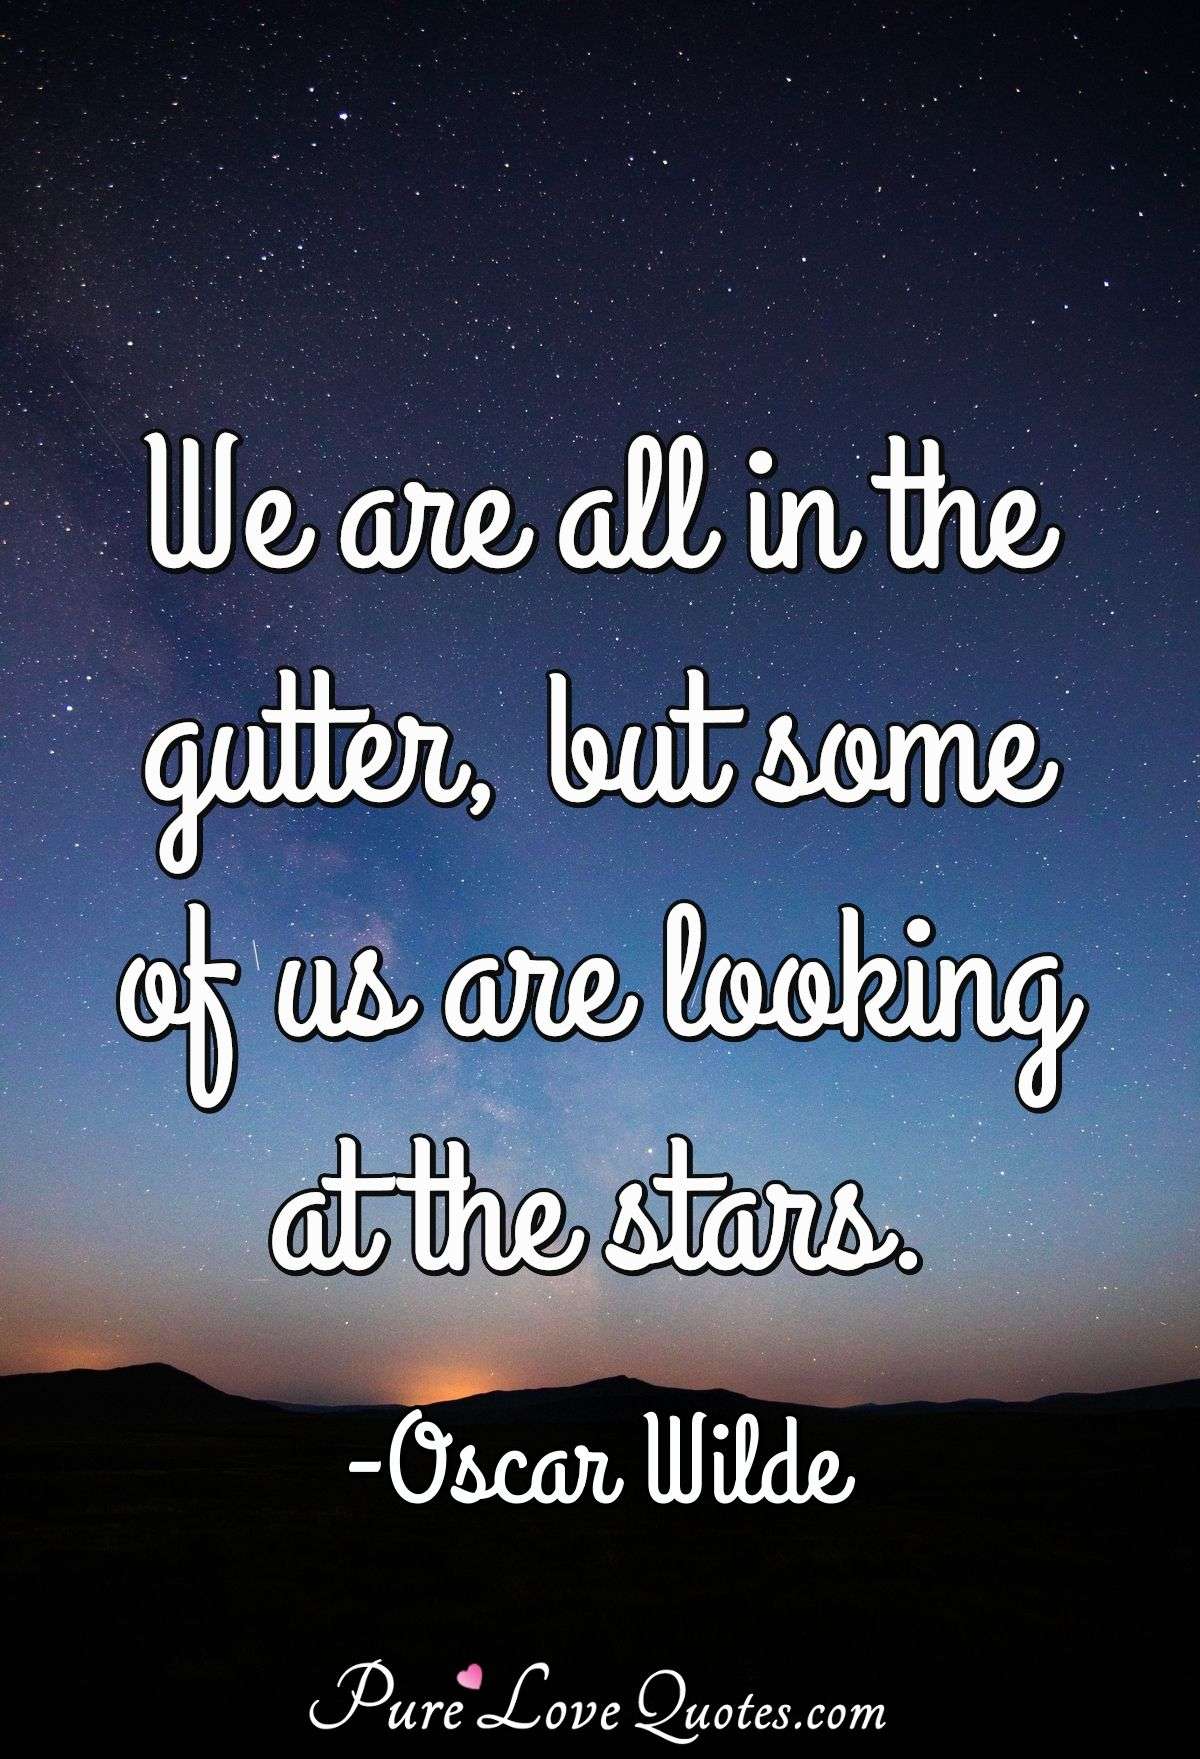 We are all in the gutter, but some of us are looking at the stars. - Oscar Wilde